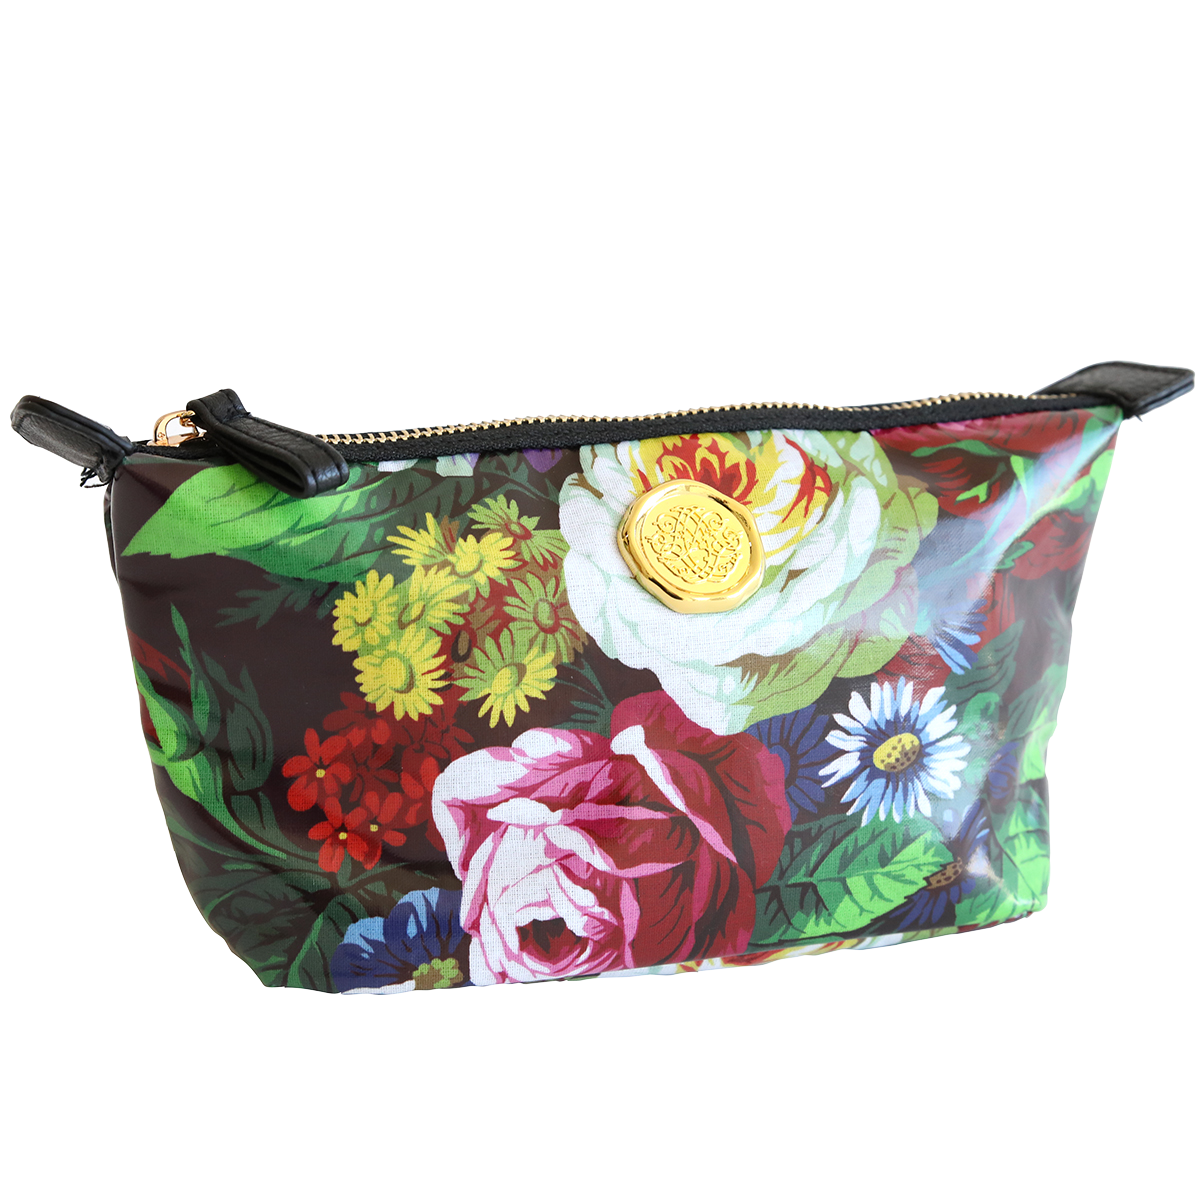 Colorful floral patterned Astrid Small Cosmetic Bag with a zipper and a gold emblem on the side, isolated on a white background.